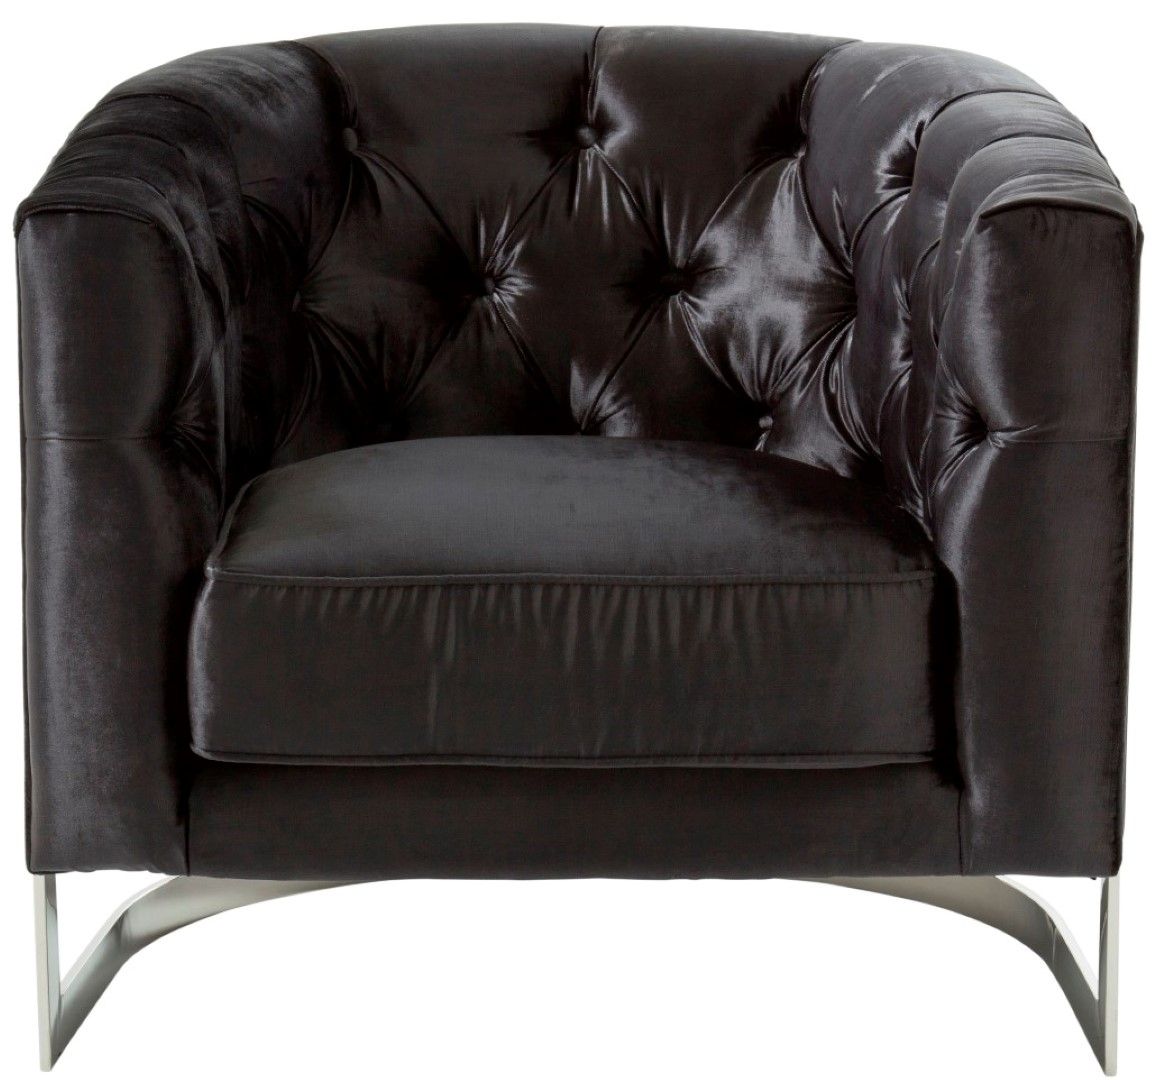 Leah Black With Silver Velvet Accent Chair Was £ 499.99 Now Half Price